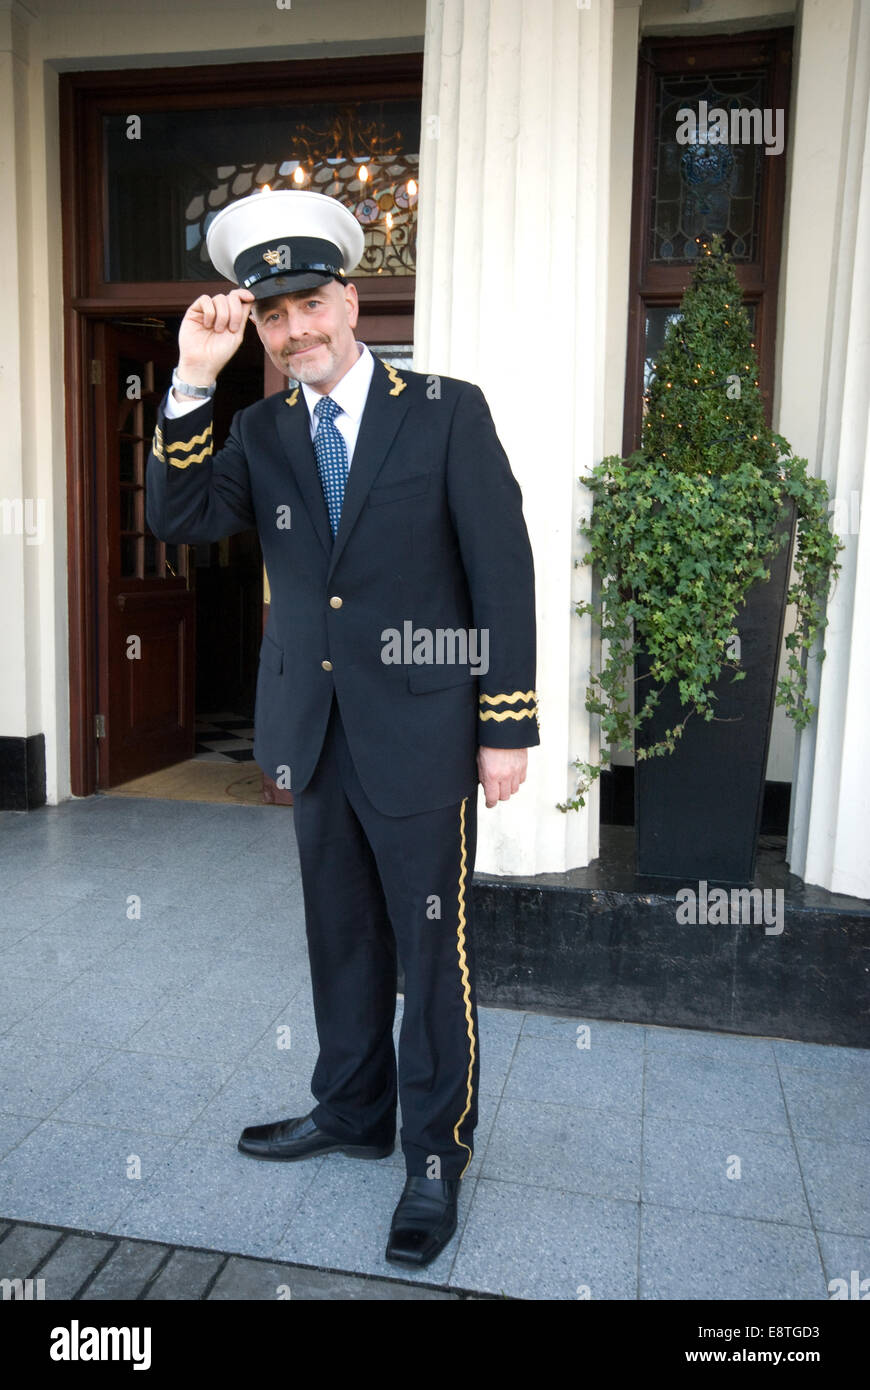 hotel reception with concierge in uniform, welcoming guests, outside and  inside the hotel Stock Photo - Alamy